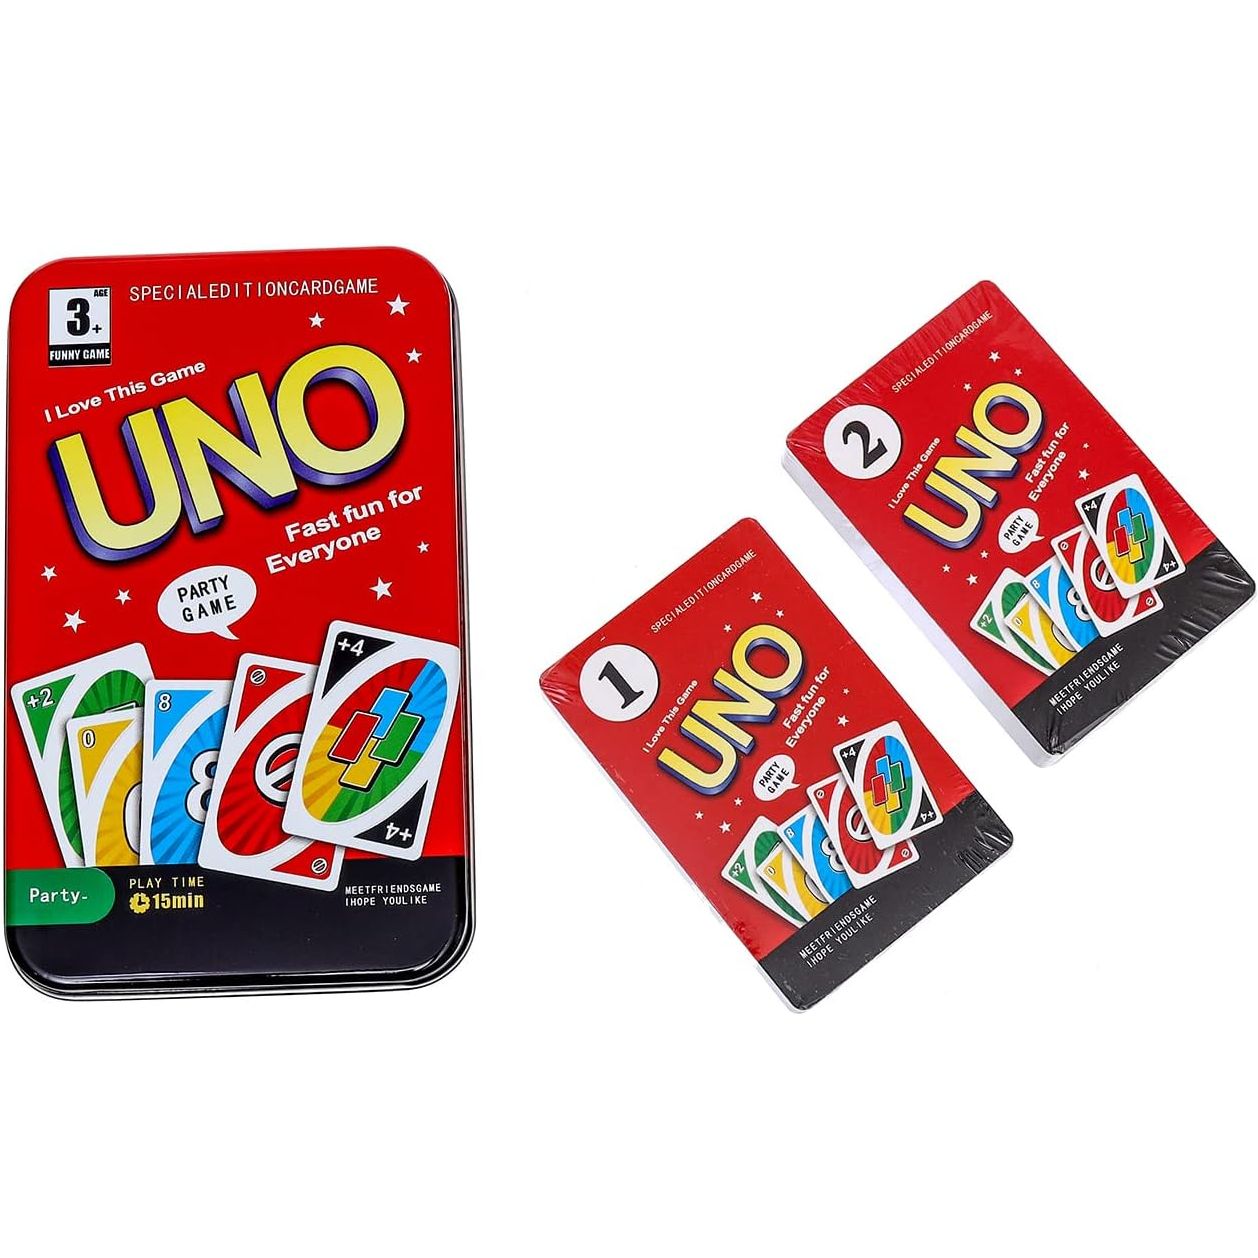 Uno red edition playing cards from 2 to 10 players best family game includes 108 playing cards - multi color